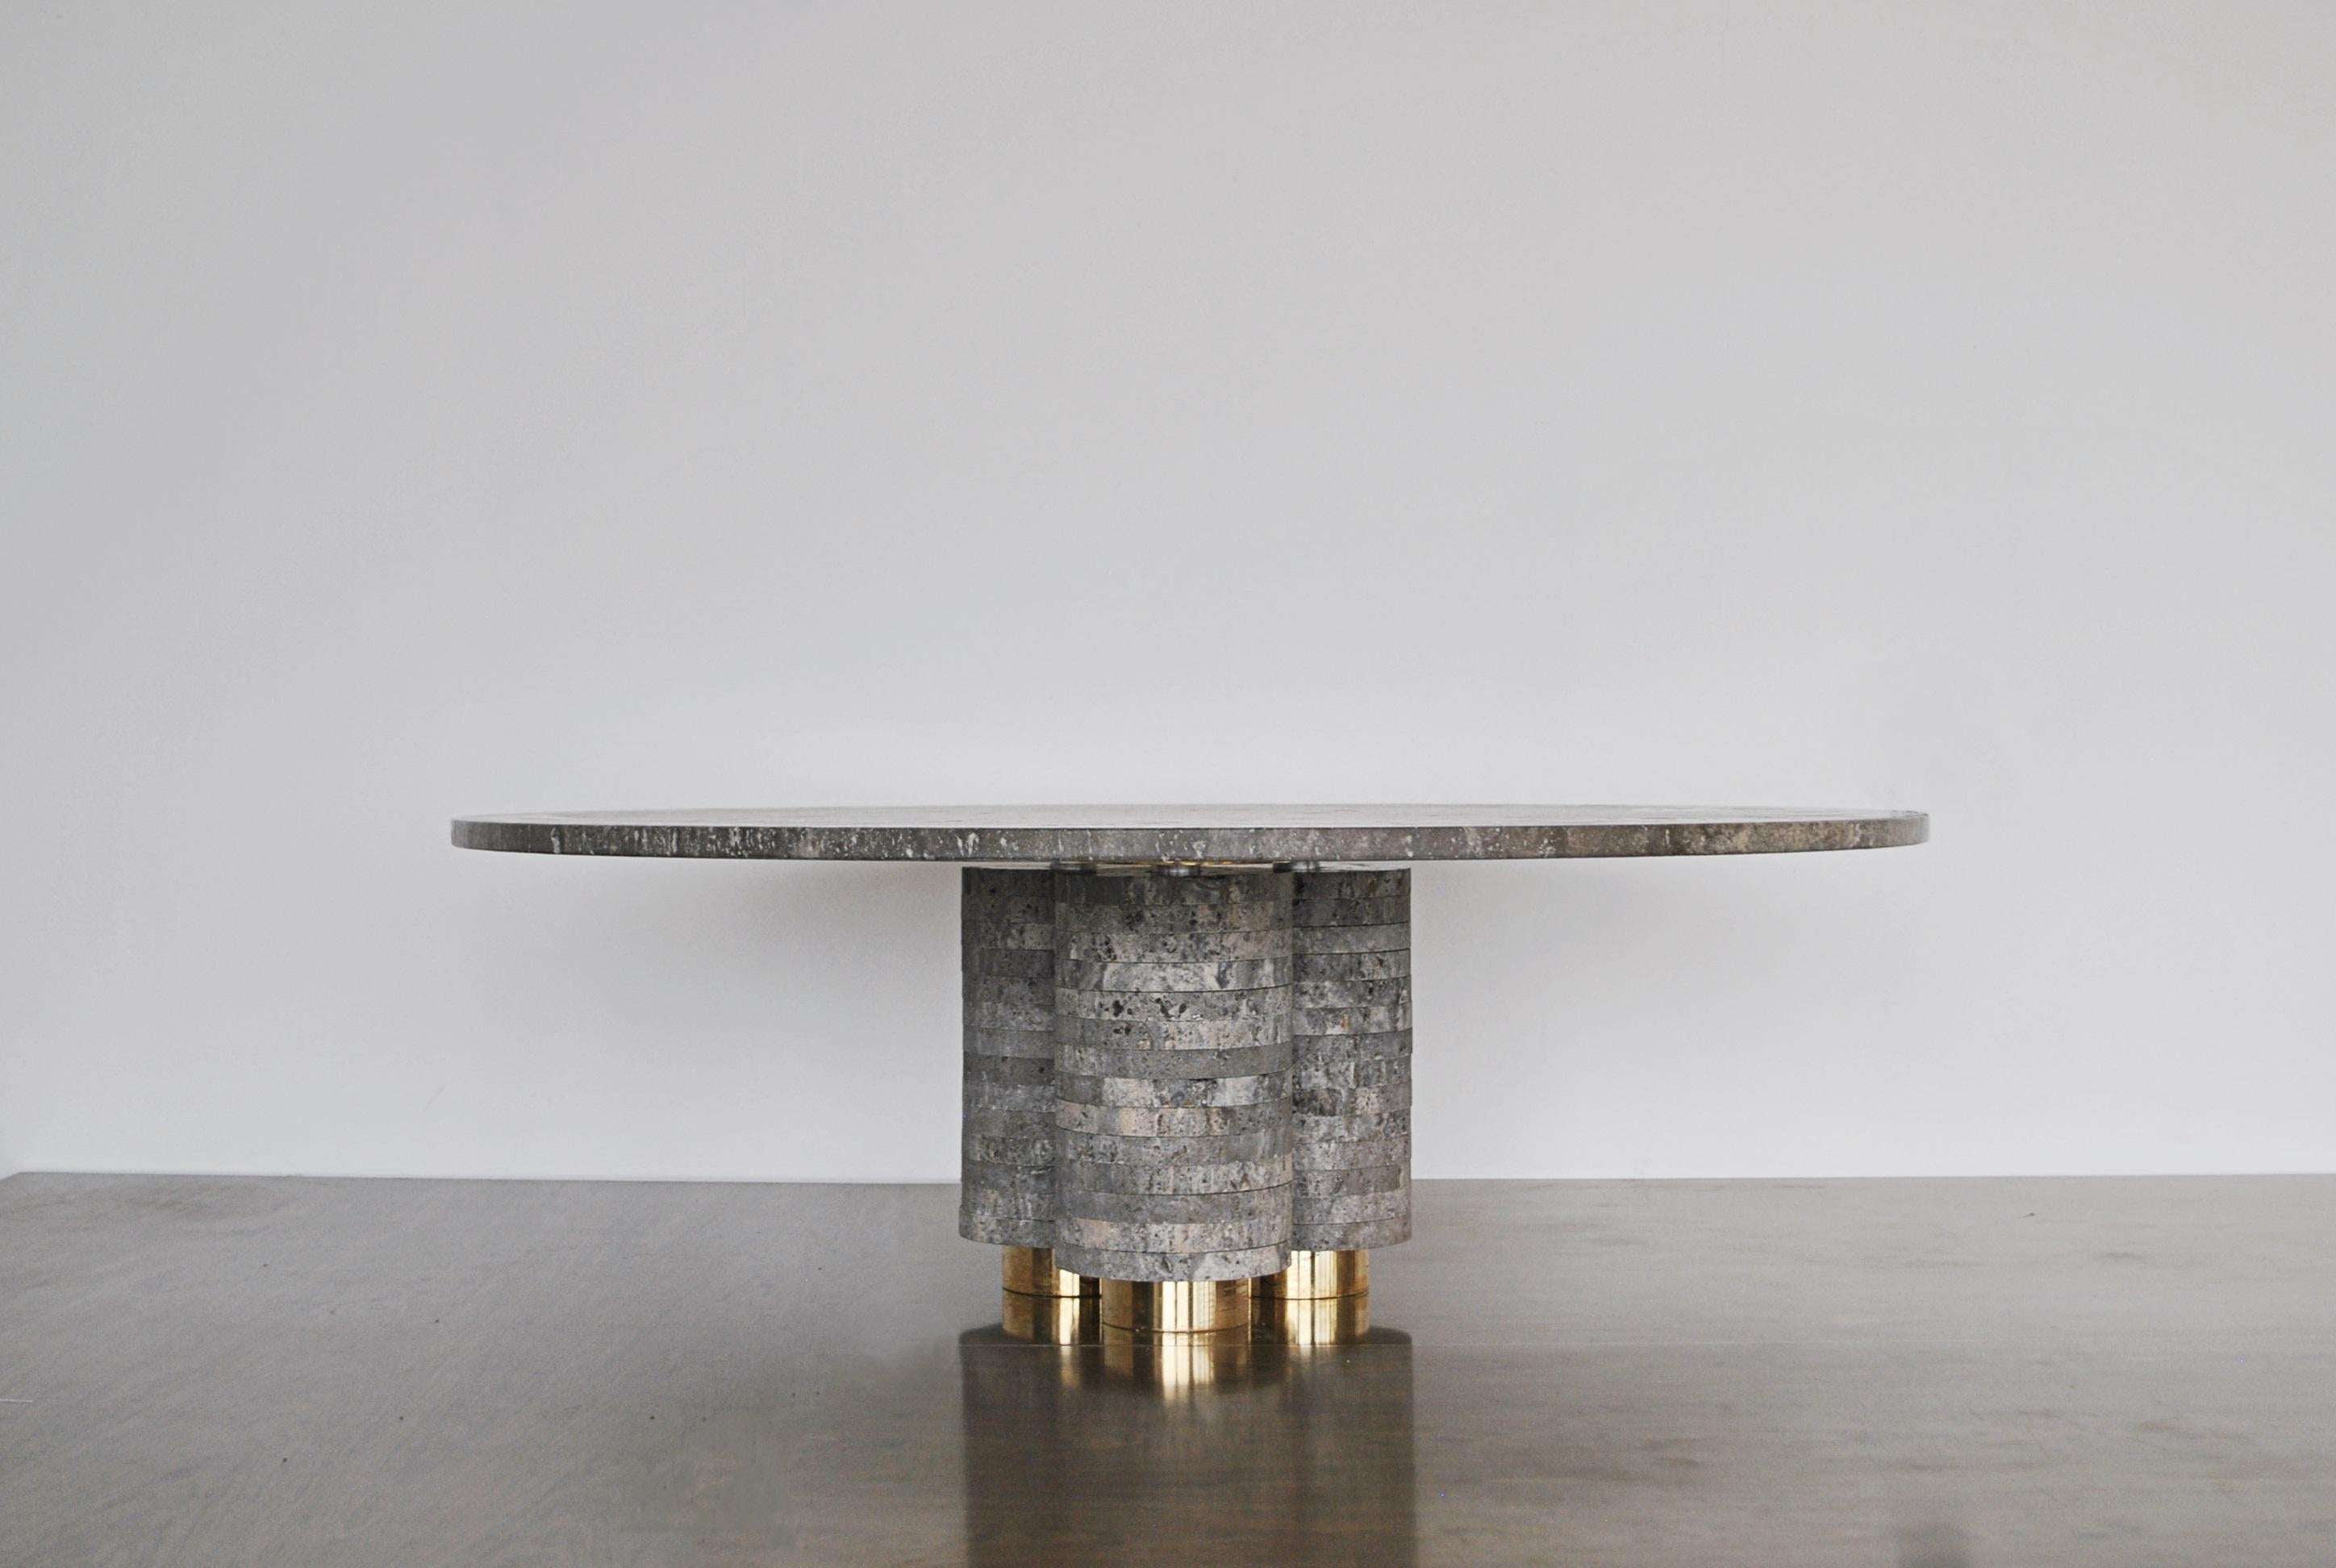 Aro travertine coffee table by Atra Design
Dimensions: D 100 x H 35 cm
Materials: Travertine marble, brass
Other marbles and size available.

Atra Design
We are Atra, a furniture brand produced by Atra form a mexico city–based high end